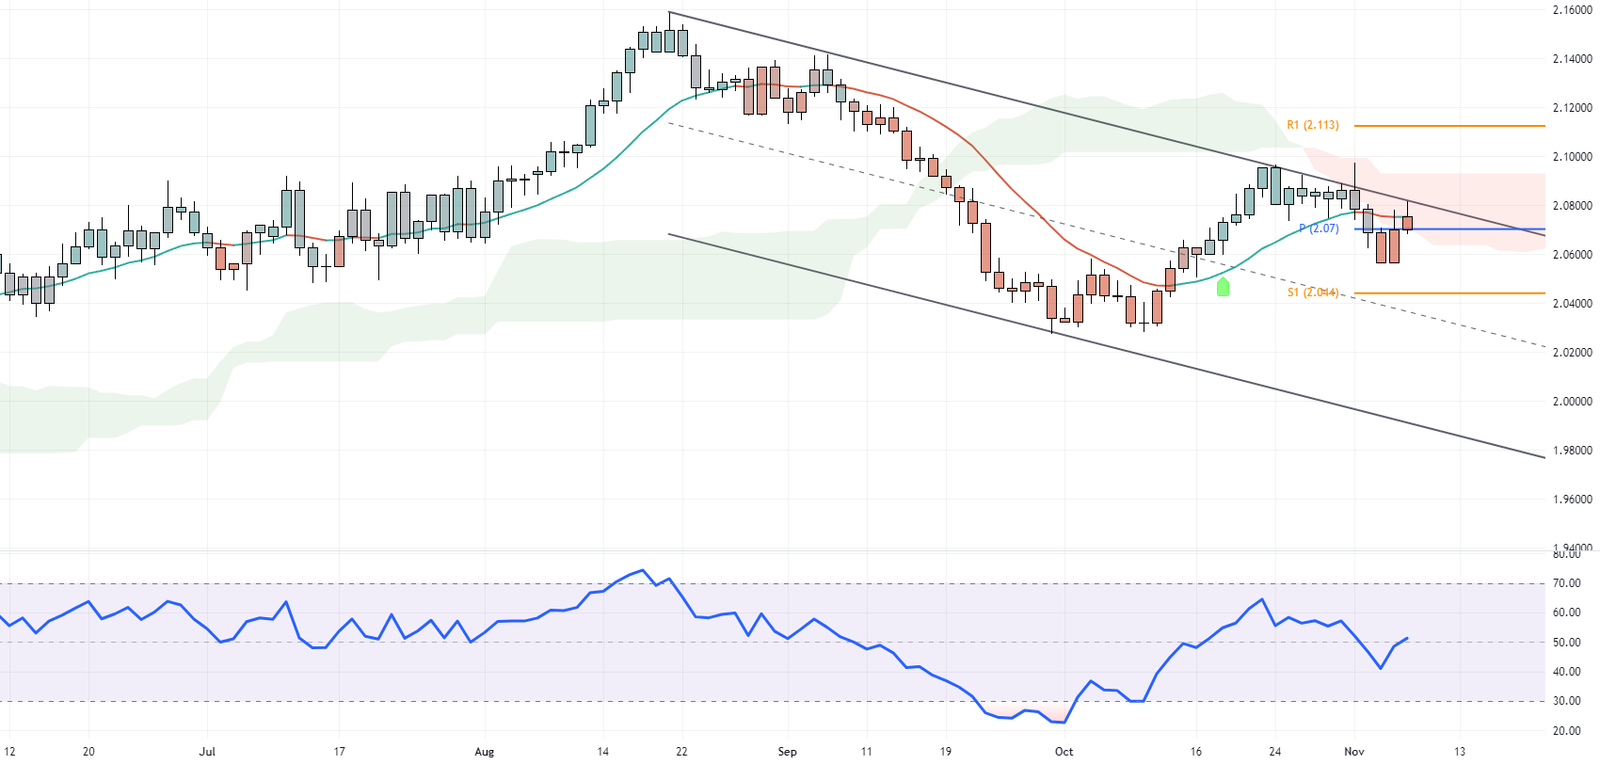 GBPNZD Forecast - Kiwi Downward Trend Continues